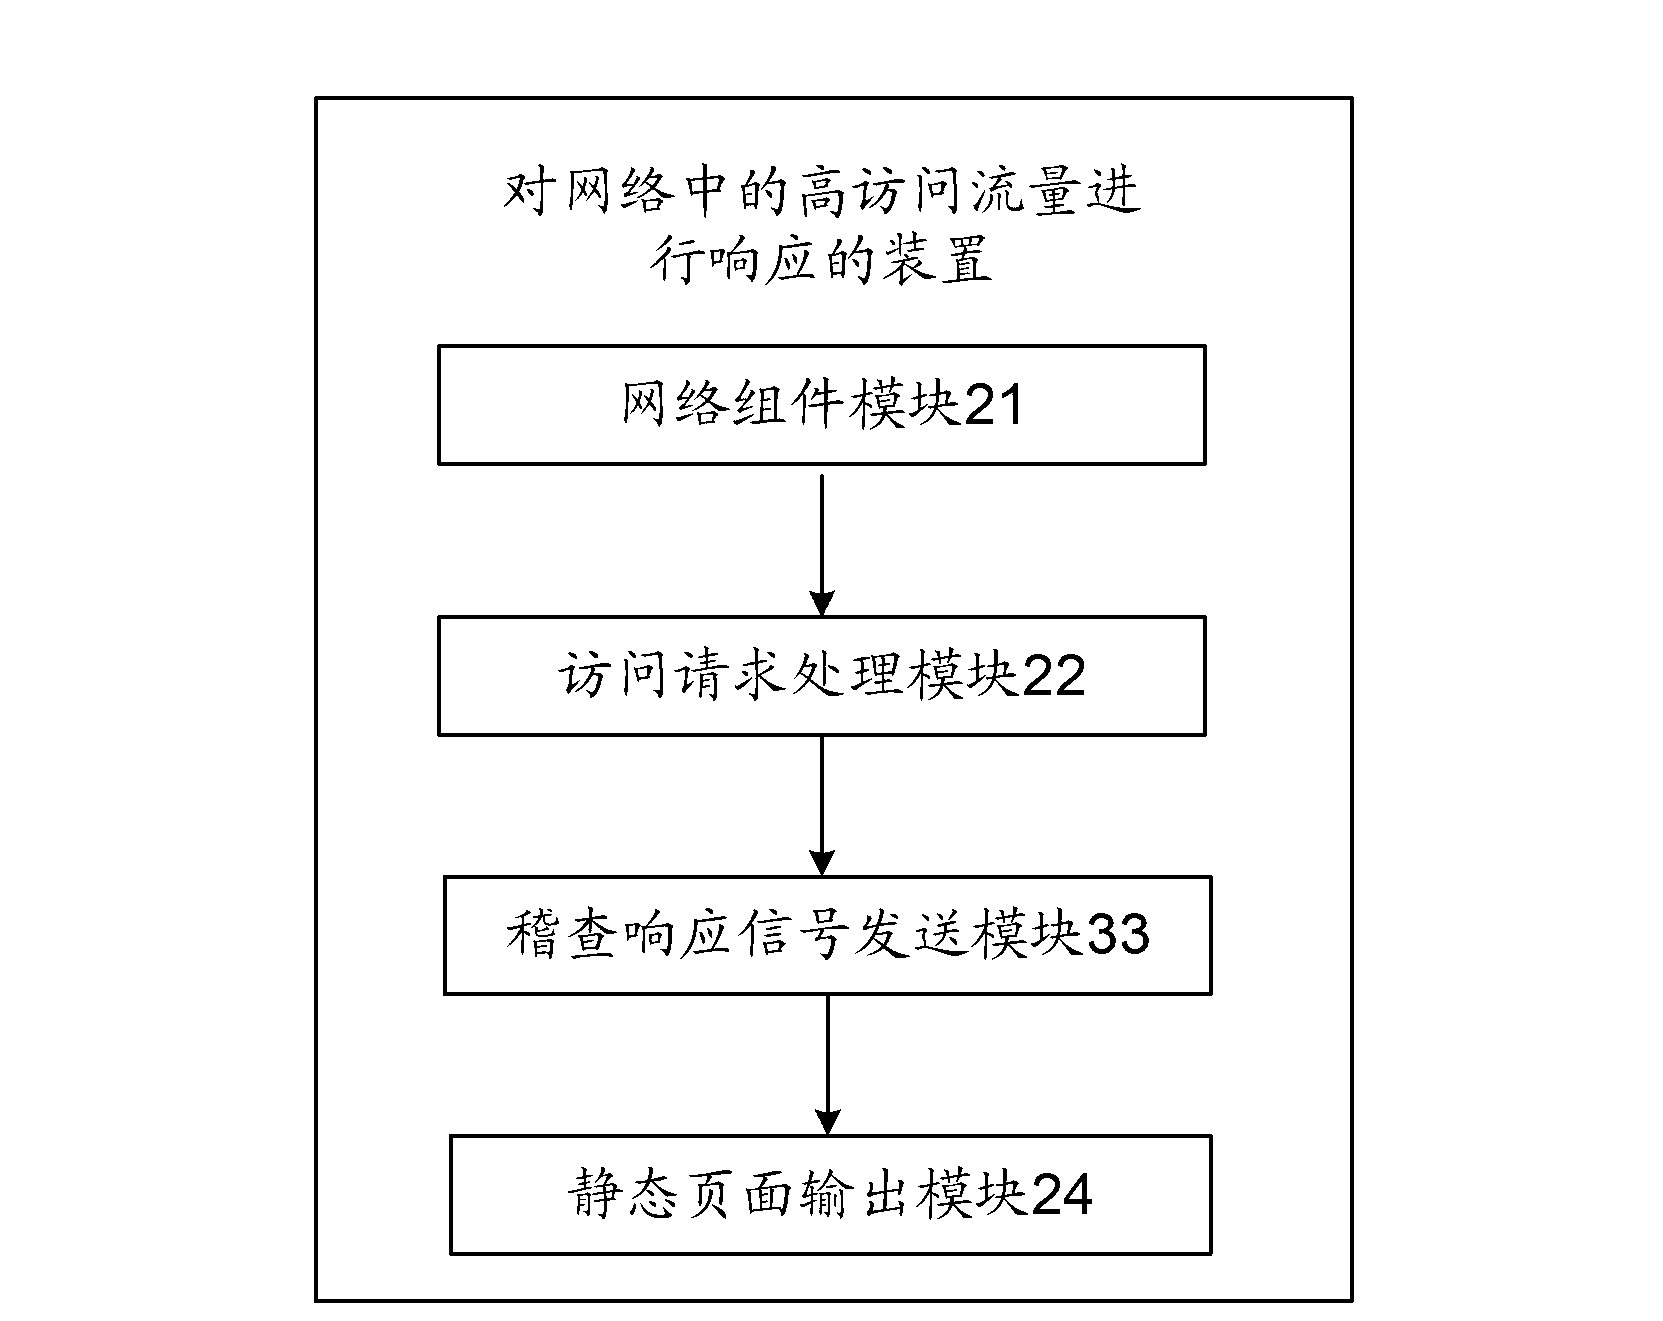 Method and device for responding to high visiting flow in network